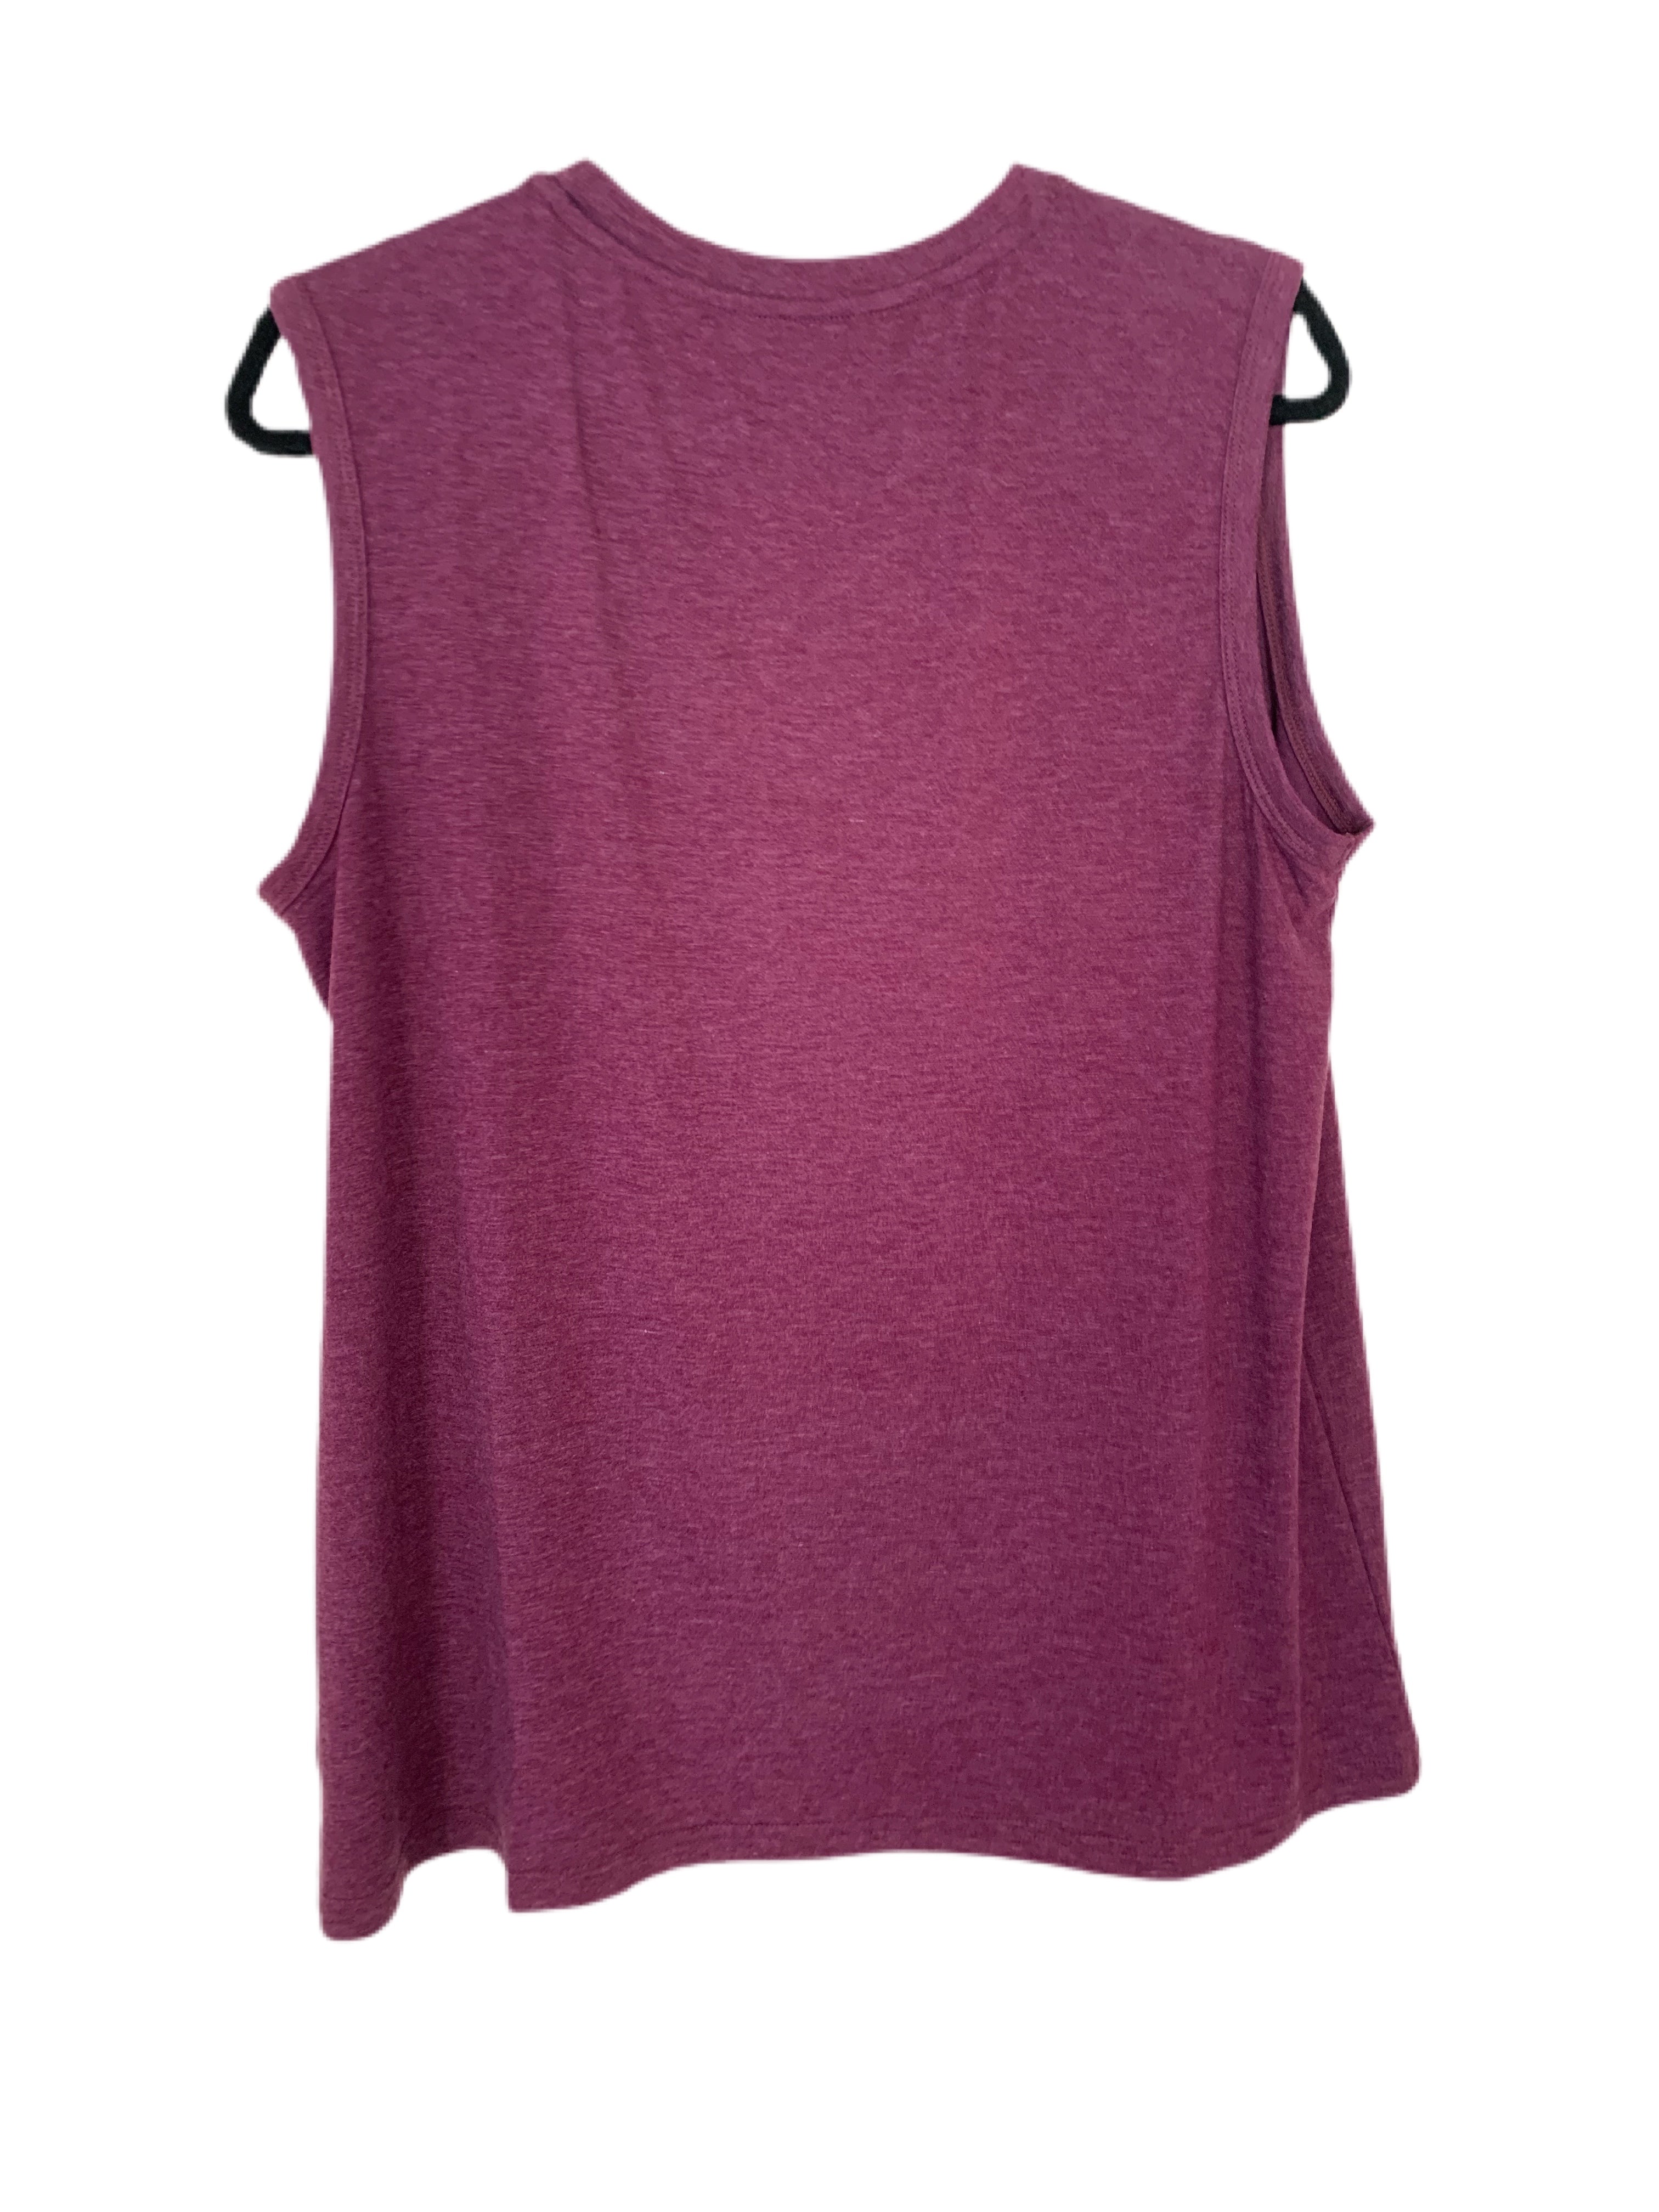 This classic purple sleeveless tee is soft and comfortable, light and breathable, perfect for hot summer days. Day Drinkers print is vinyl letters in multiple colors. Grab all your friends and have a good time with this trendy top.